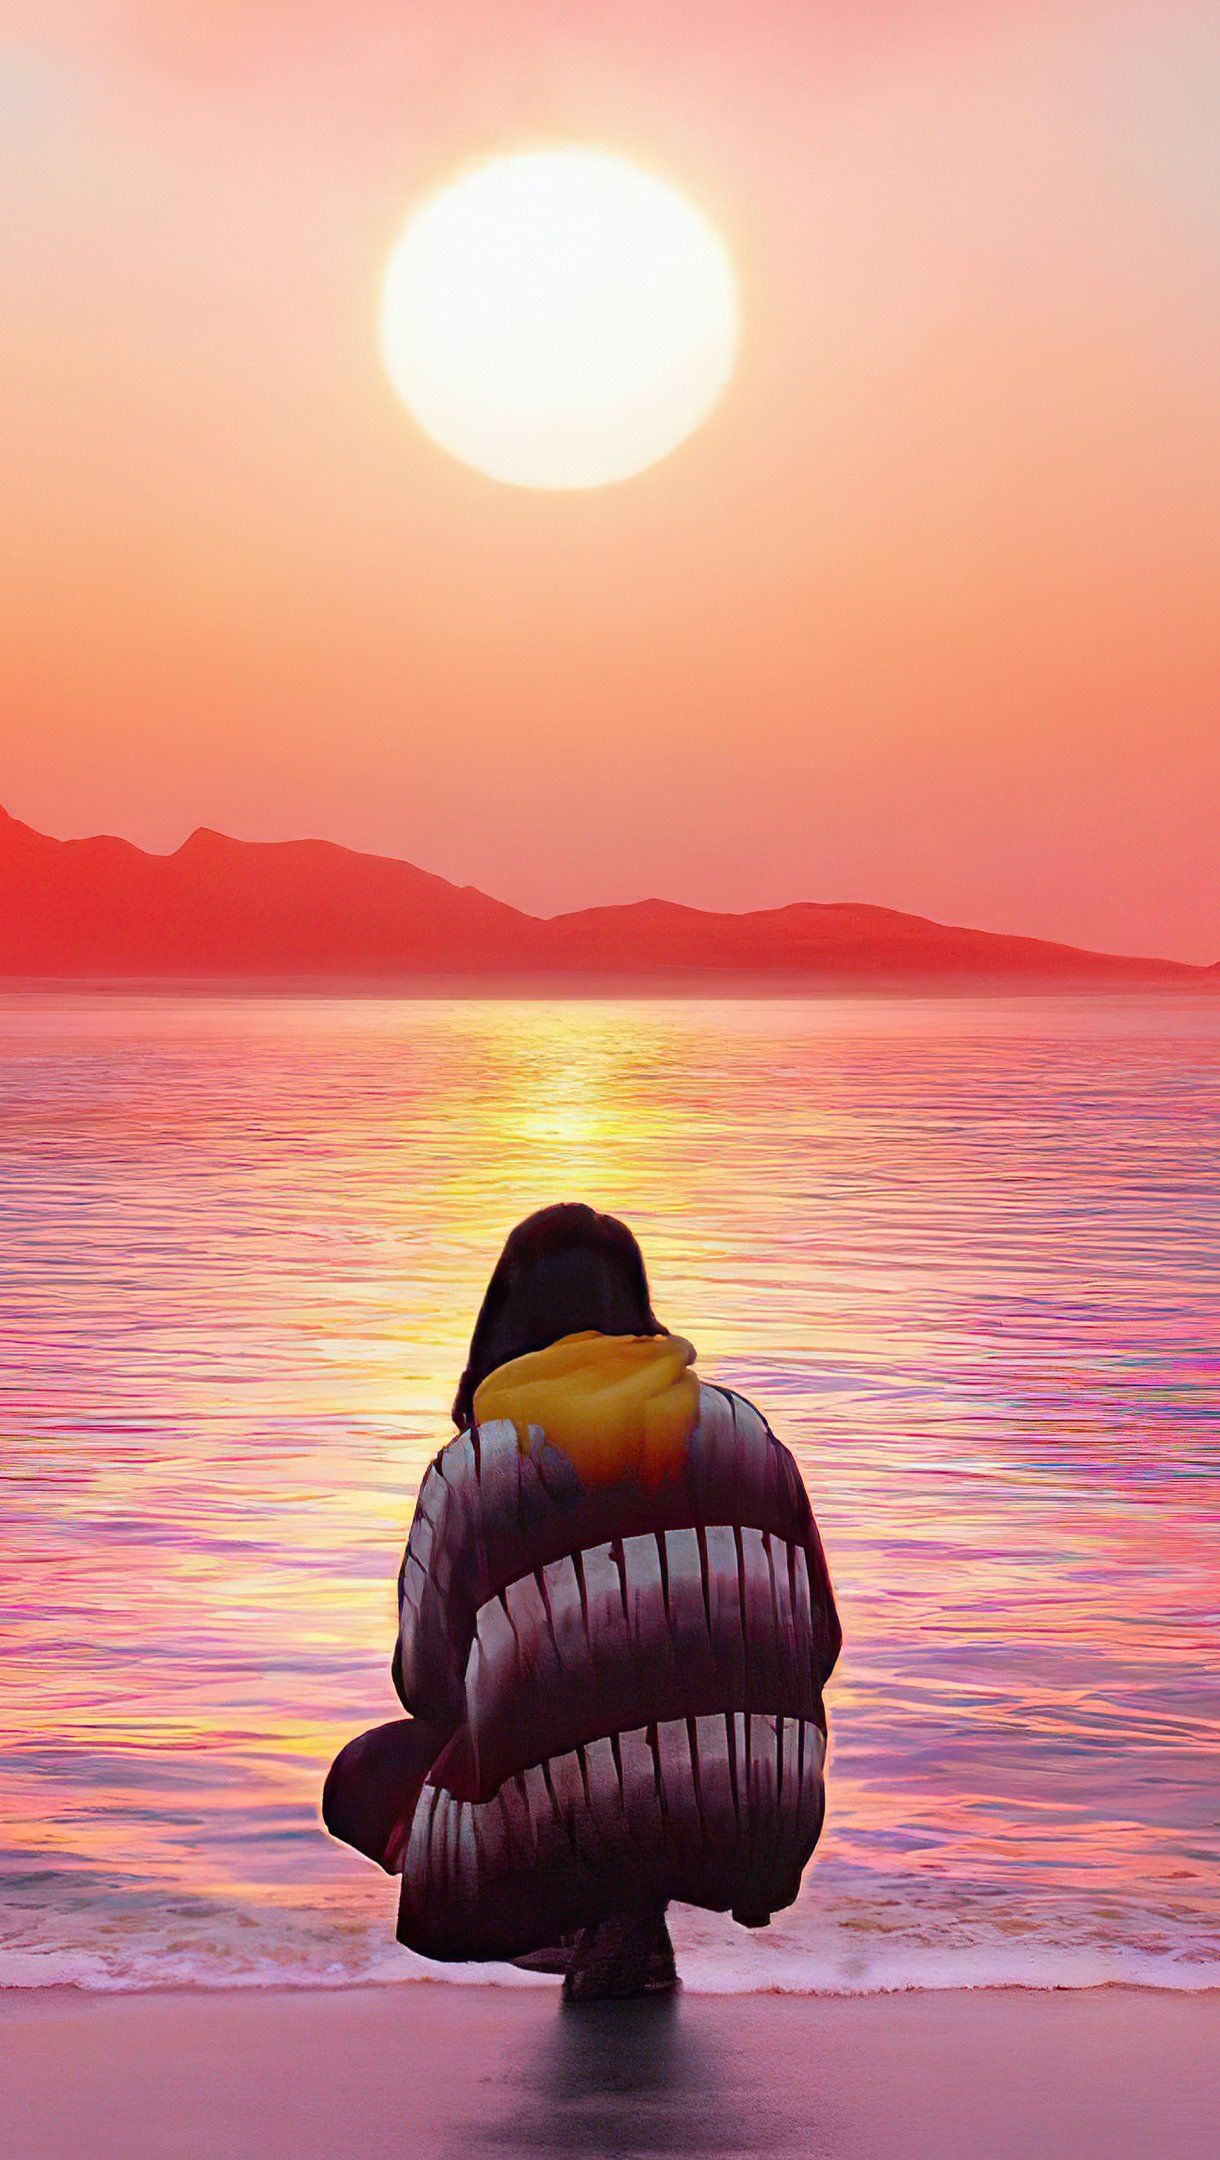 Girl in the beach looking at the sunset Wallpaper 4k Ultra HD